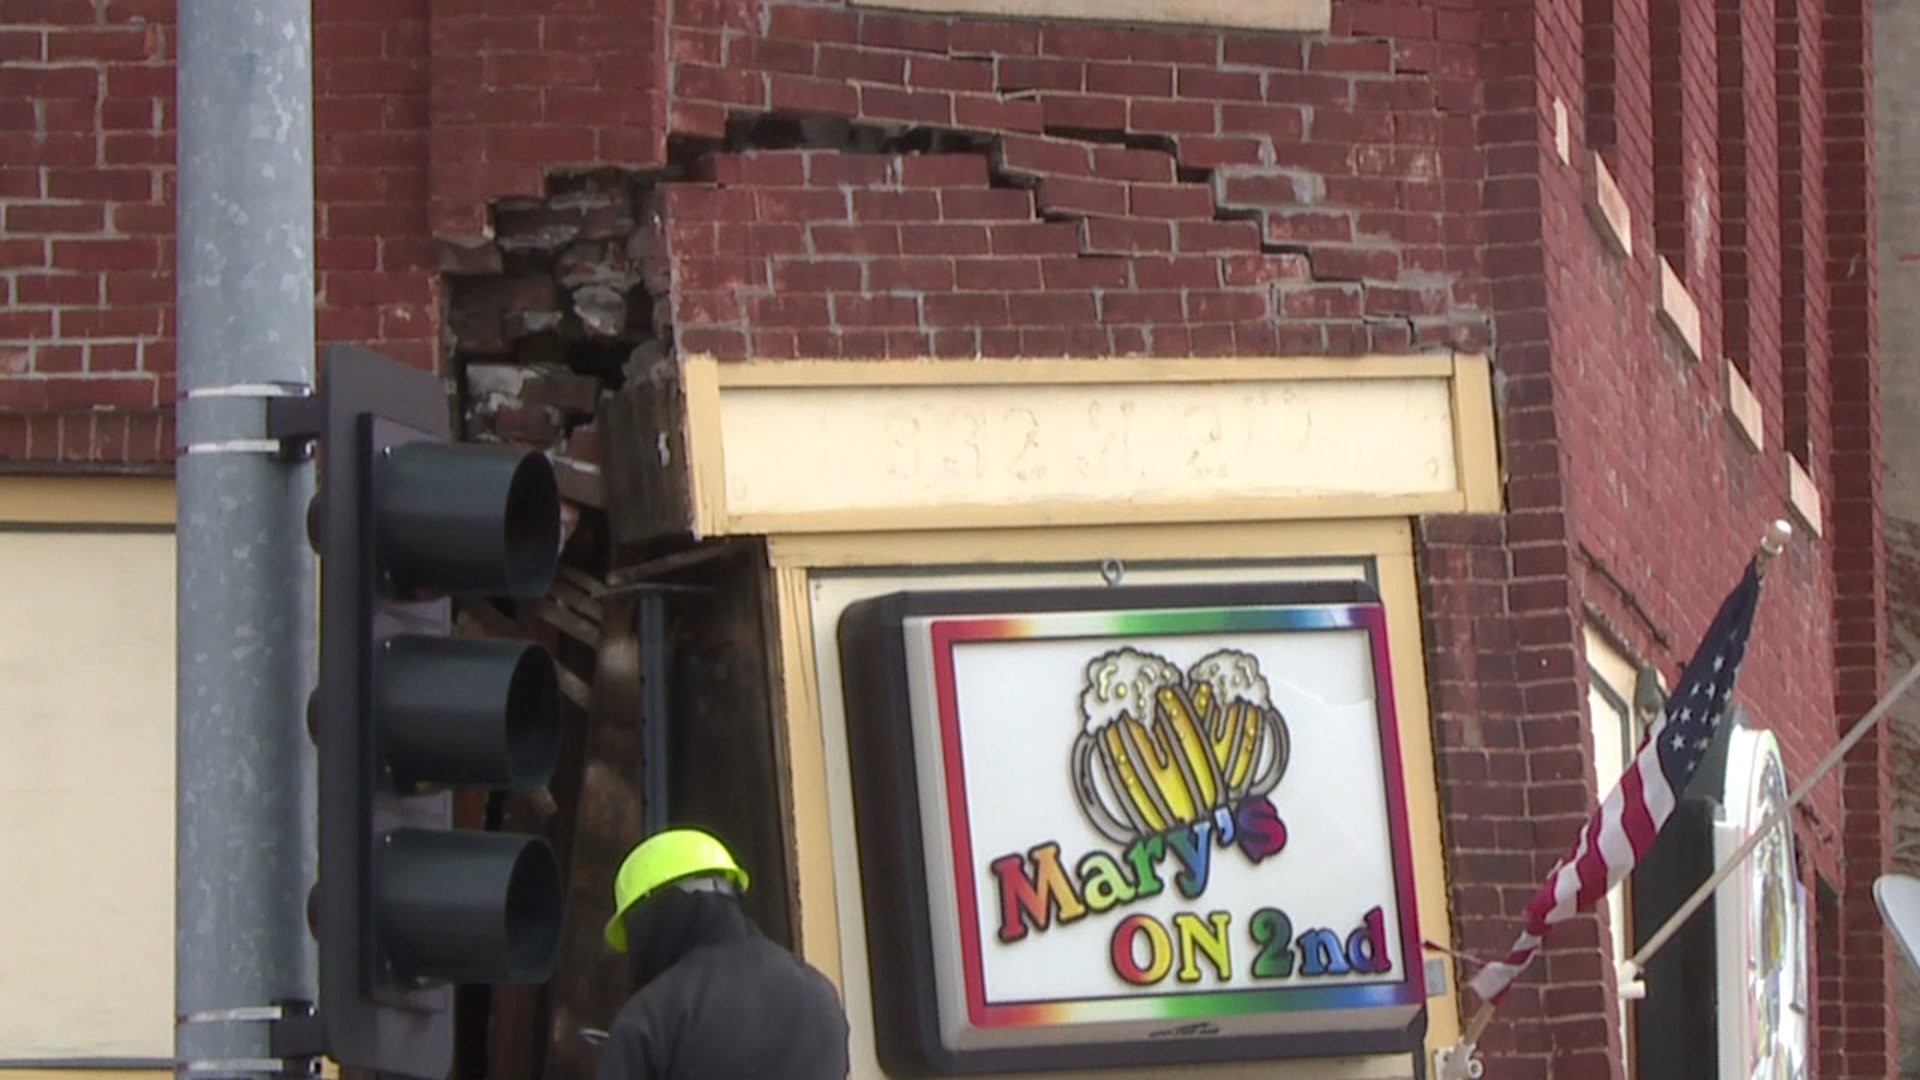 Stolen car crashes into Mary`s on 2nd in Davenport